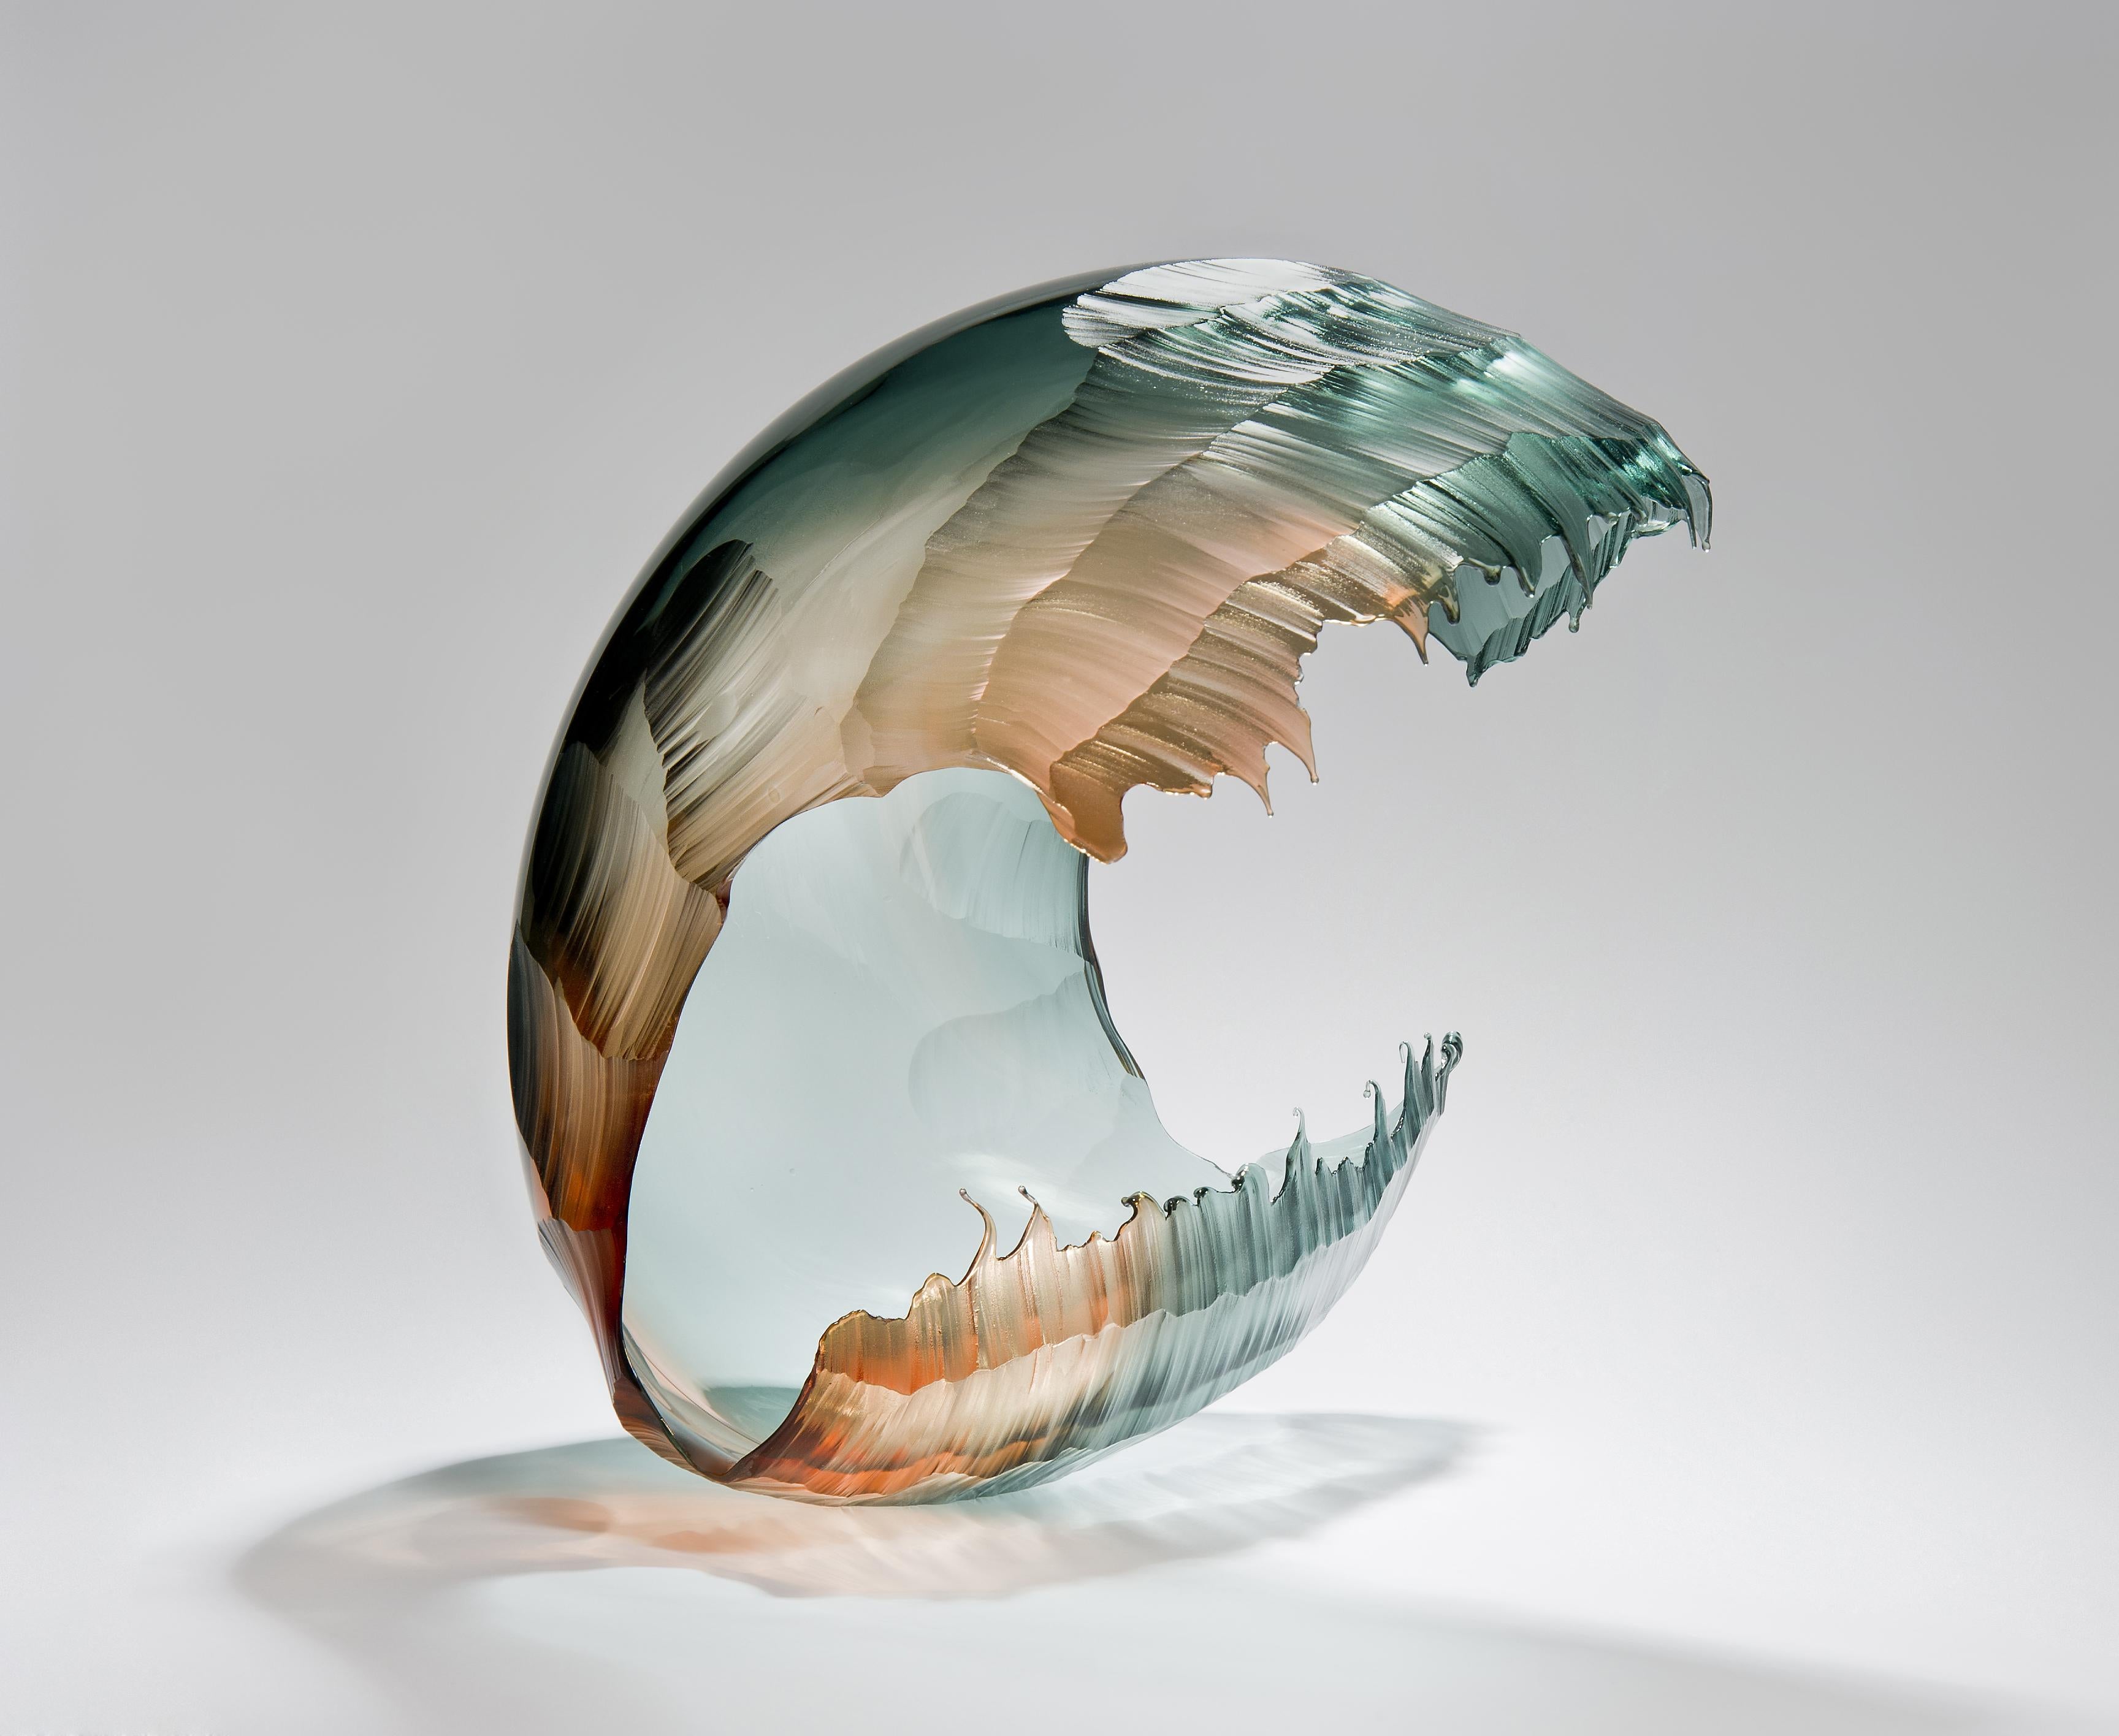 North Sea Morning Wave Form, is a unique Teal & Apricot Glass Sculpture by the British artist Graham Muir.
With his ‘Wave’ series, Muir exploits gravity and the way in which the soft, molten glass responds, no mean feat as often both this physical